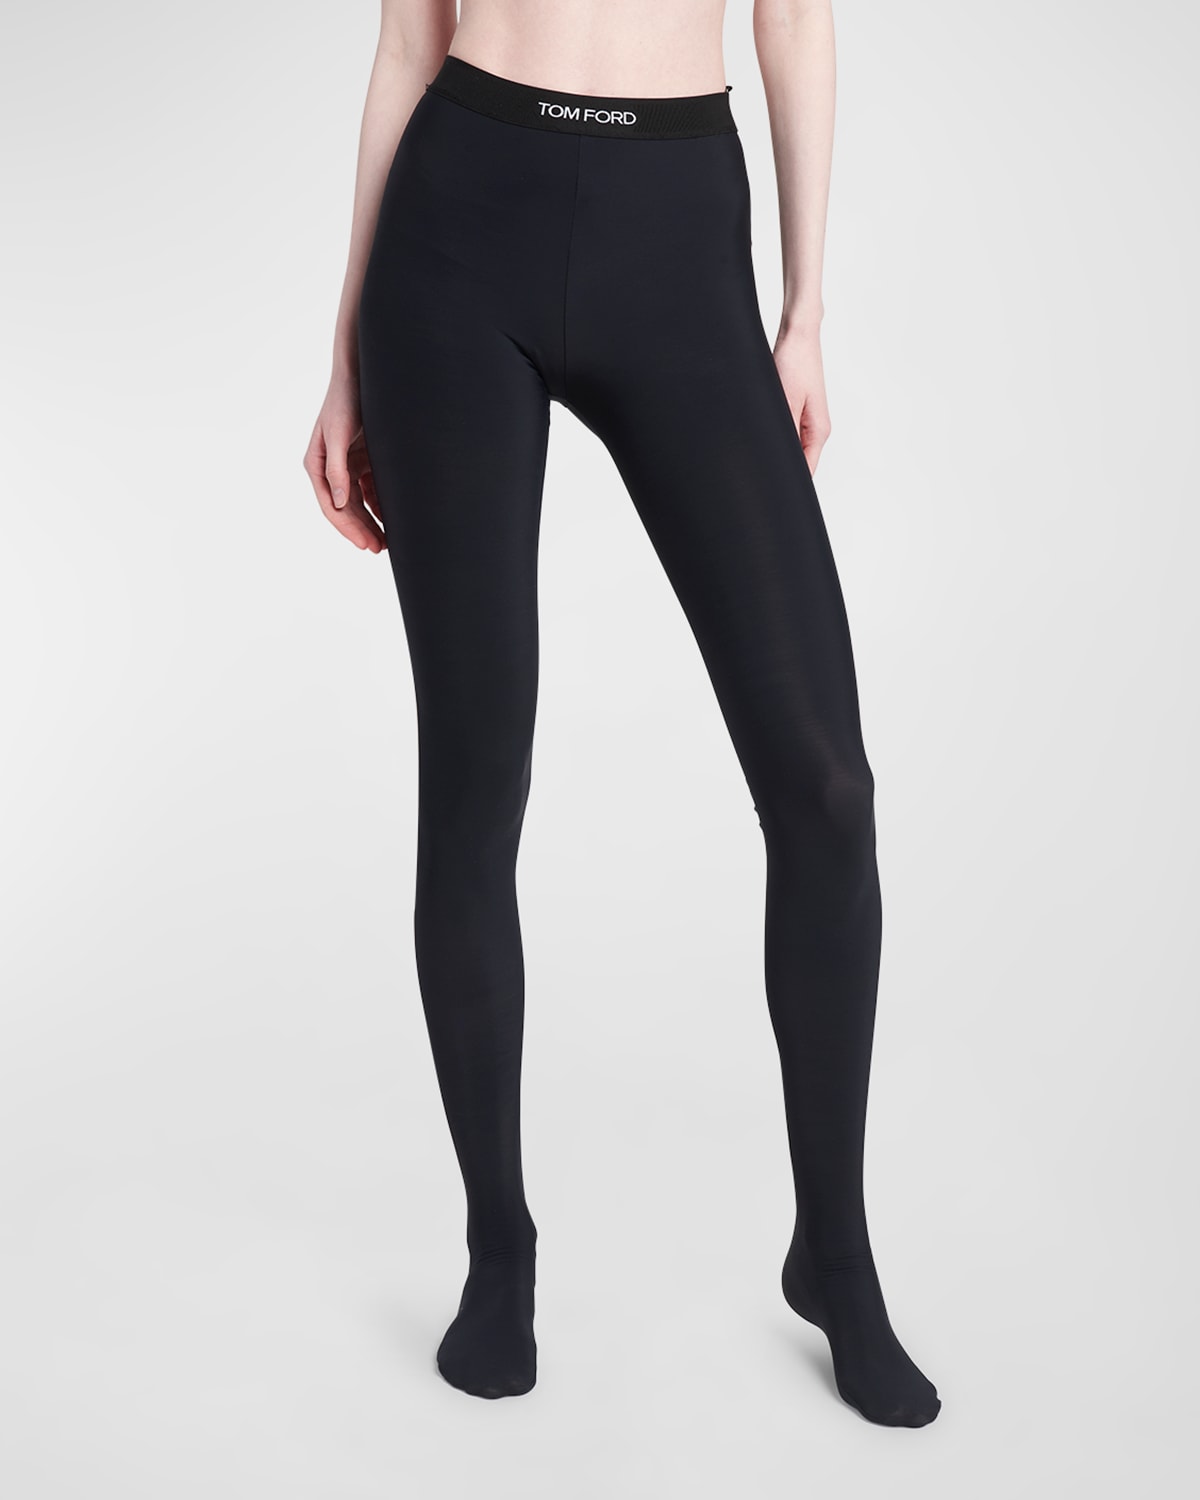 TOM FORD GLOSSY JERSEY FOOTED LEGGINGS WITH LOGO BAND